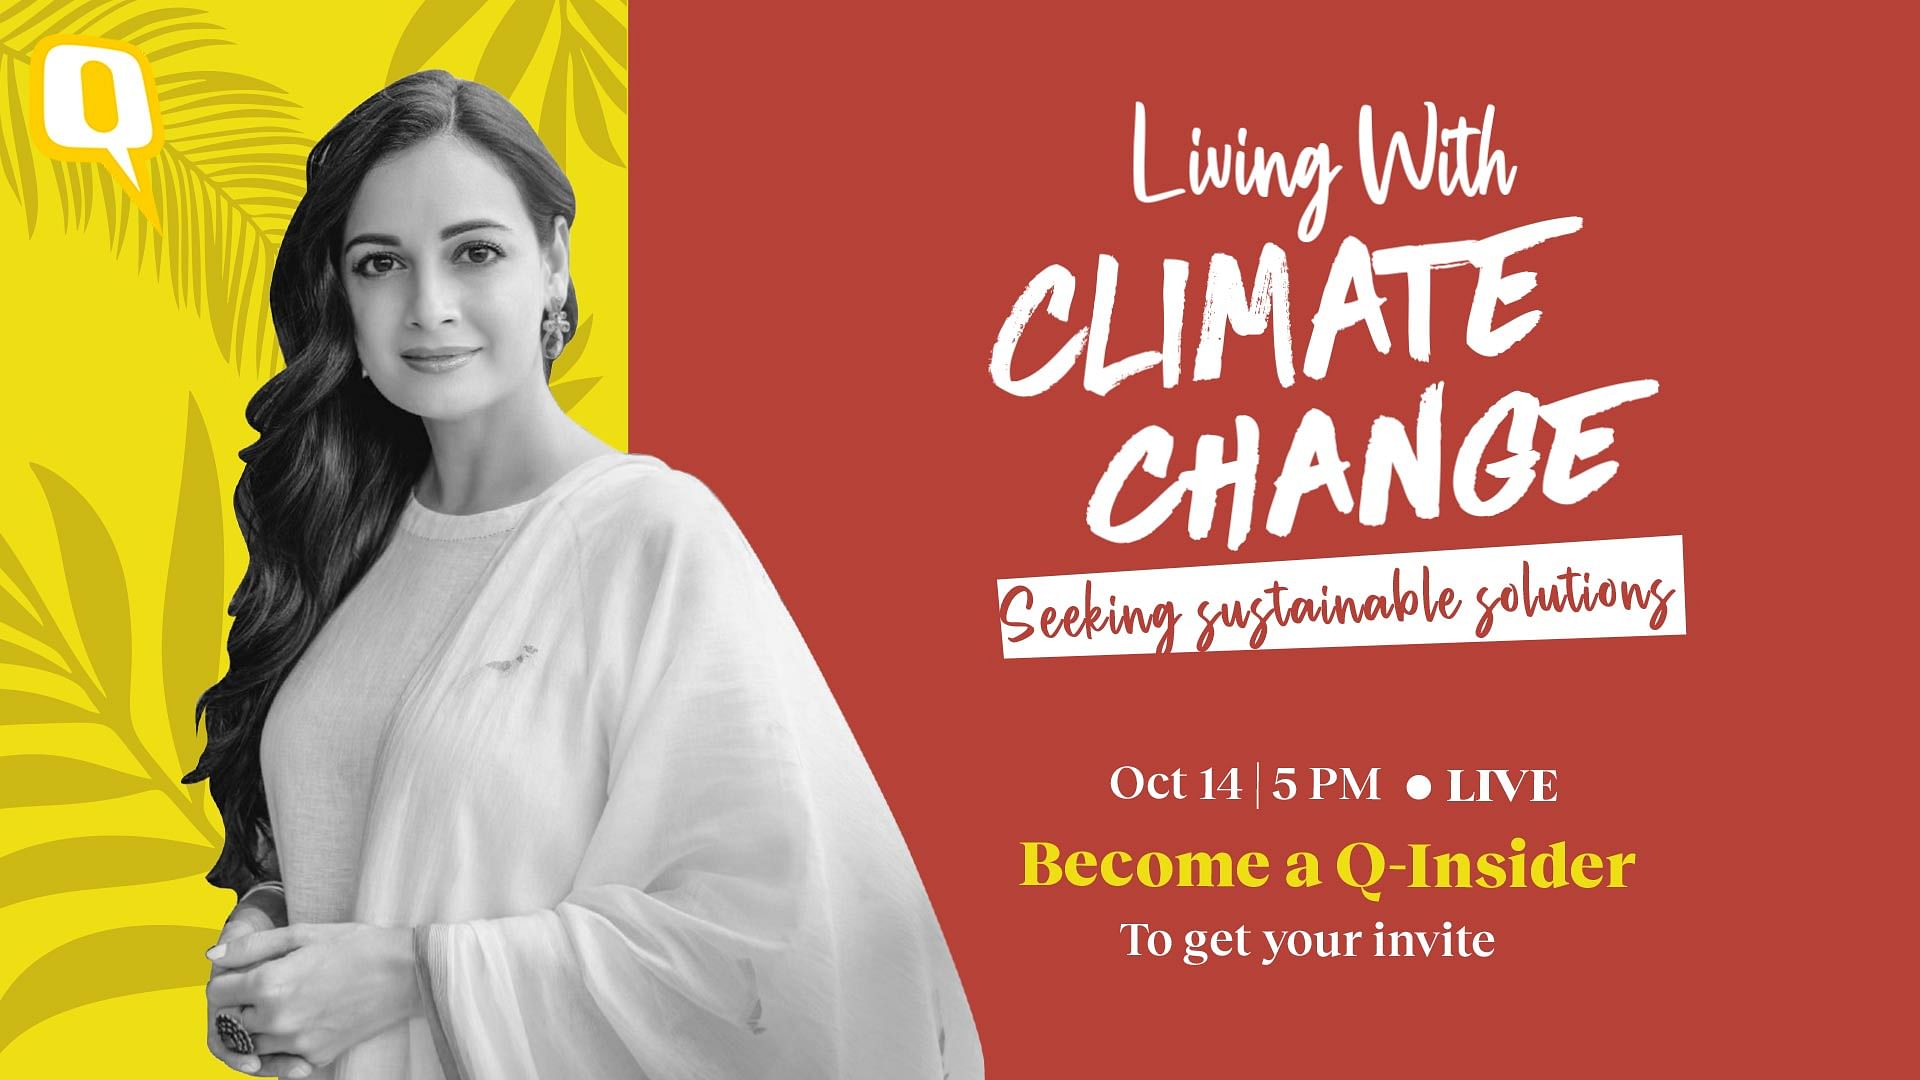 <div class="paragraphs"><p>We are holding a LIVE online event,&nbsp;<strong>'Living With Climate Change: Seeking Sustainable Solutions'</strong>, with&nbsp;<strong>Dia Mirza</strong>&nbsp;and our panel of experts, where we will also preview some of our most compelling climate change stories. Join us on&nbsp;<strong>FRIDAY, 14 October at 5 PM IST</strong>.</p></div>